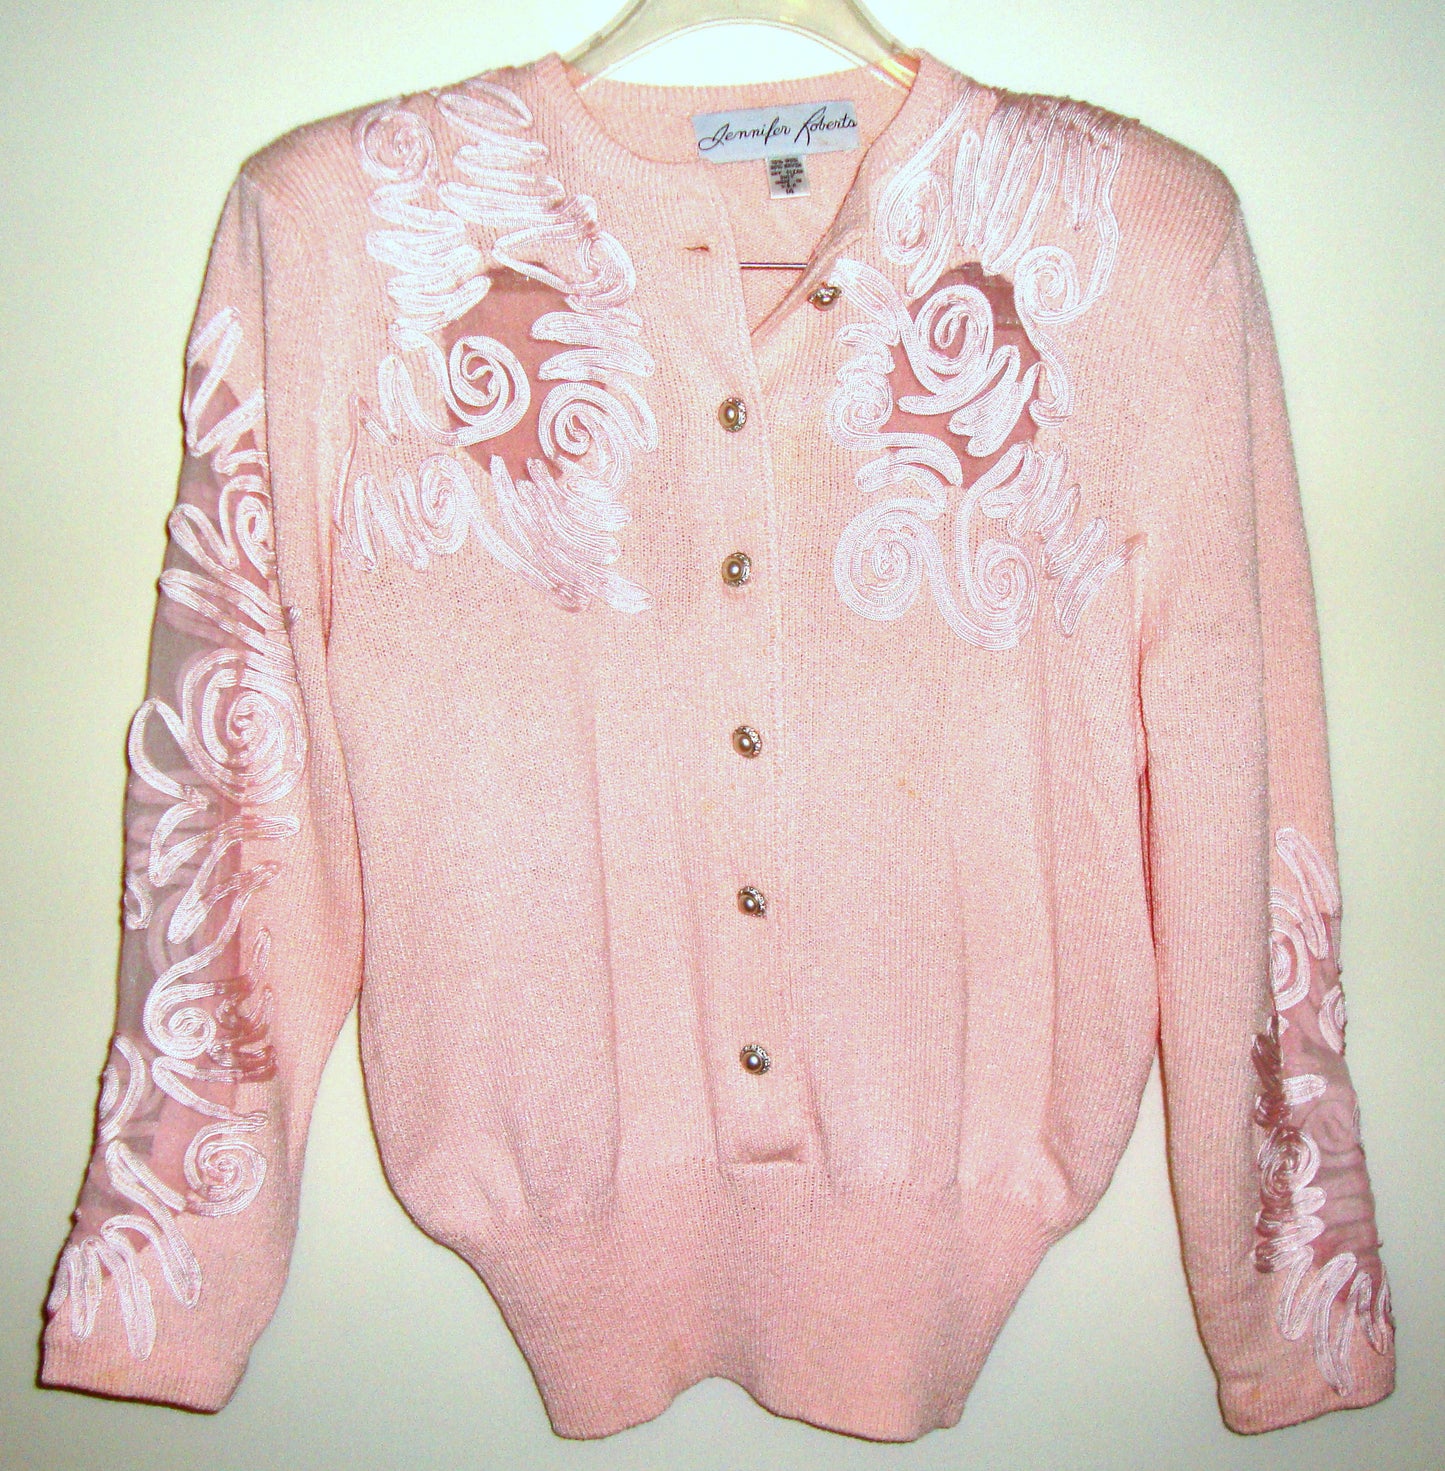 Vintage JENNIFER ROBERTS Embroidered Rhinestone Sweater Pearl Buttons